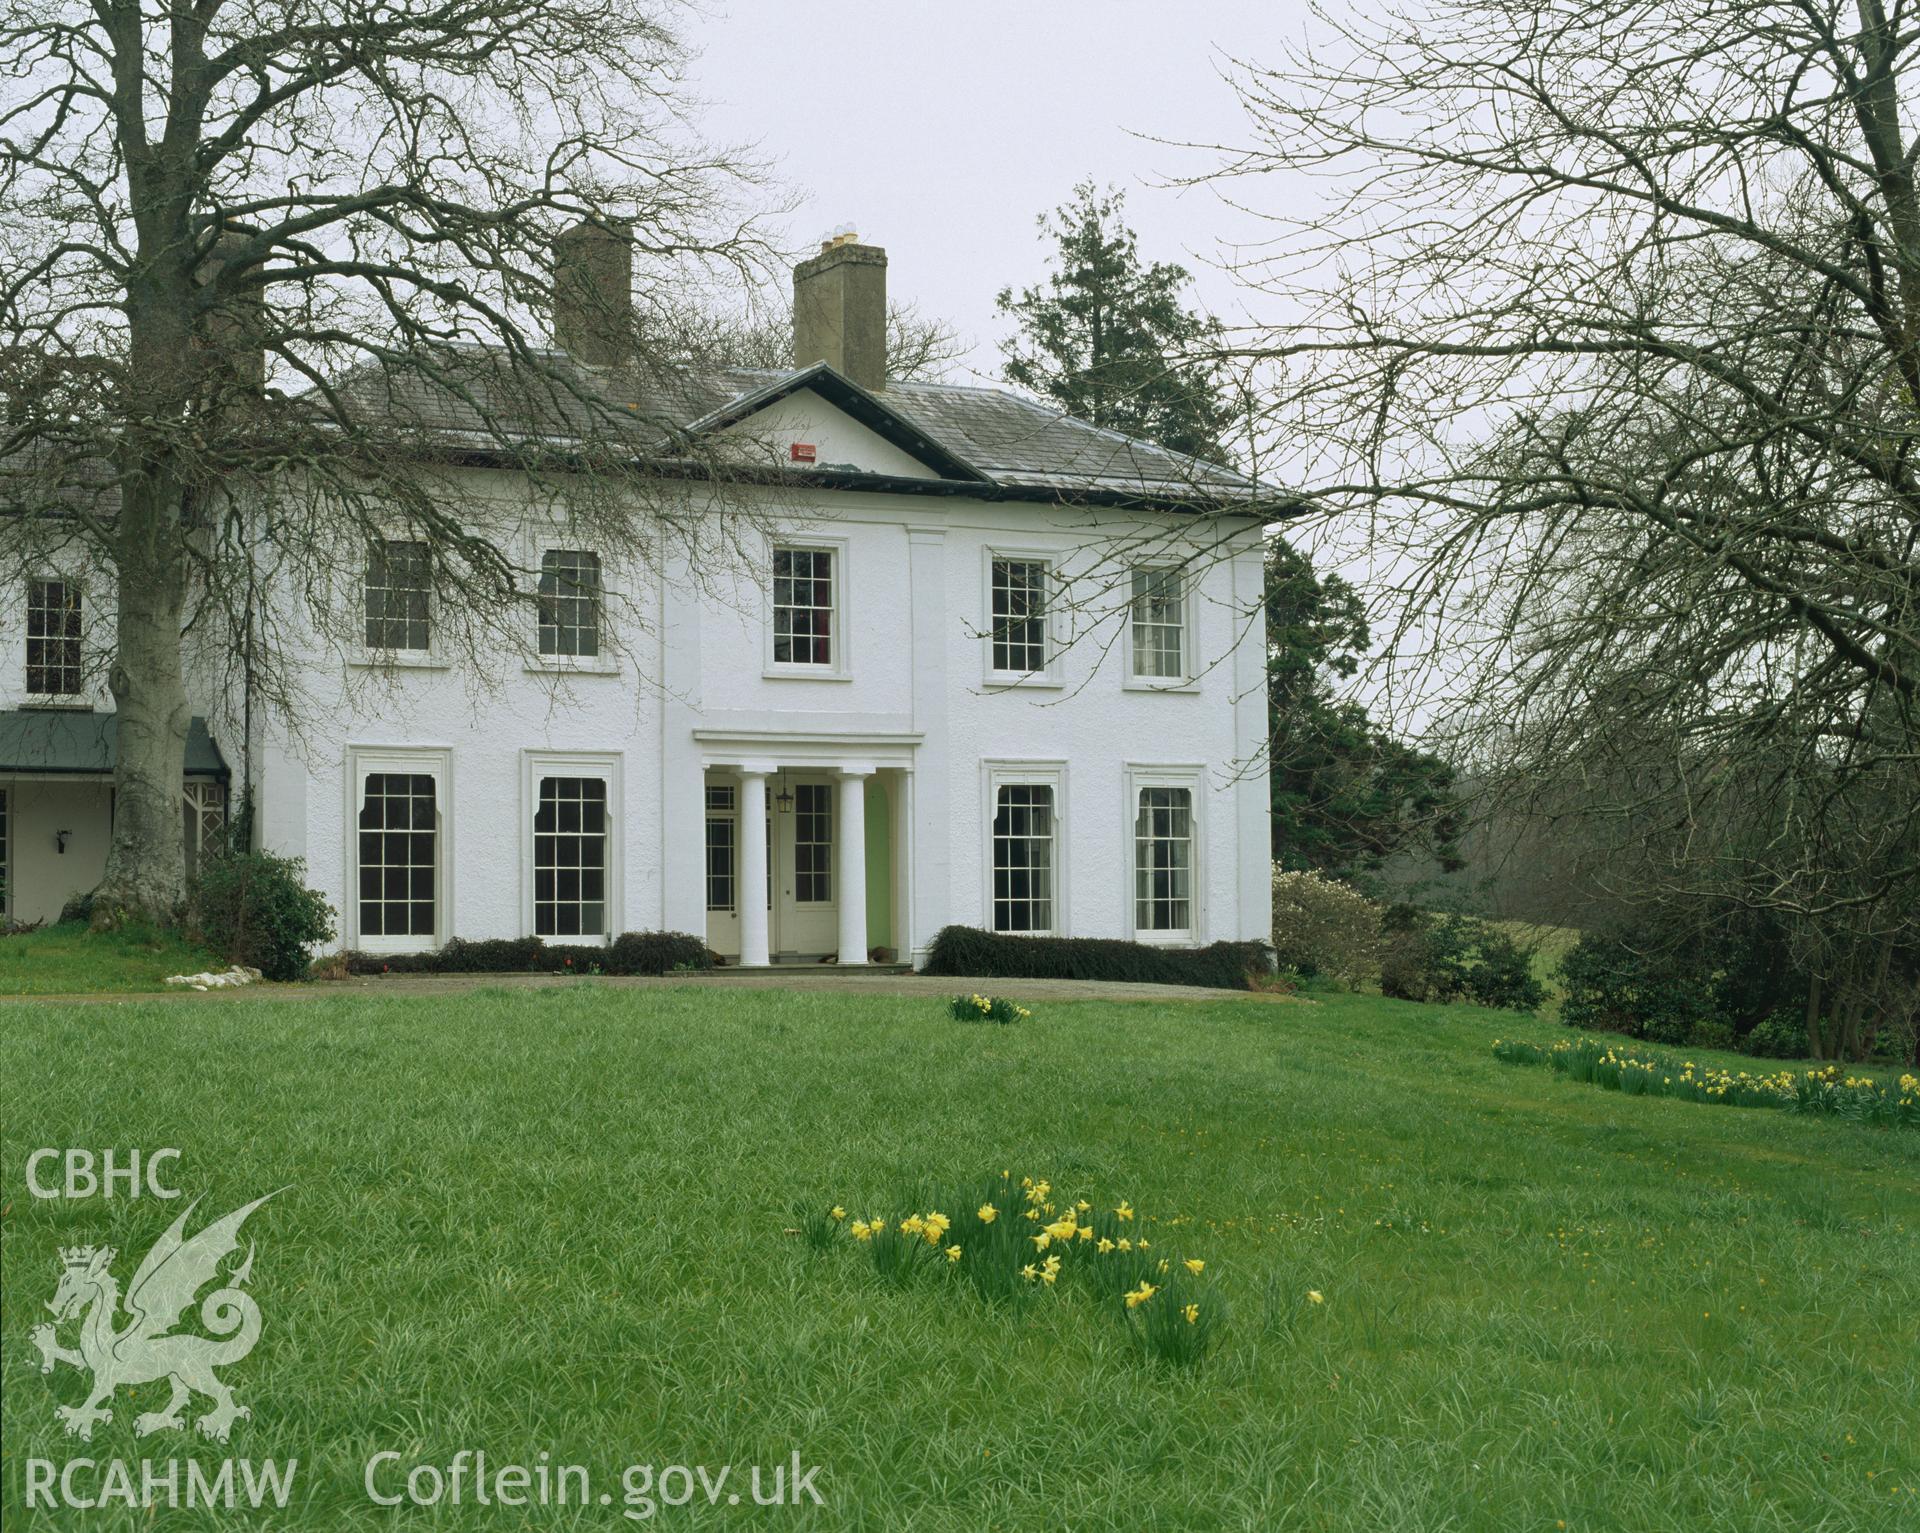 Colour transparency showing an exterior view of Plas Llangoedmor, produced by Iain Wright, June 2004